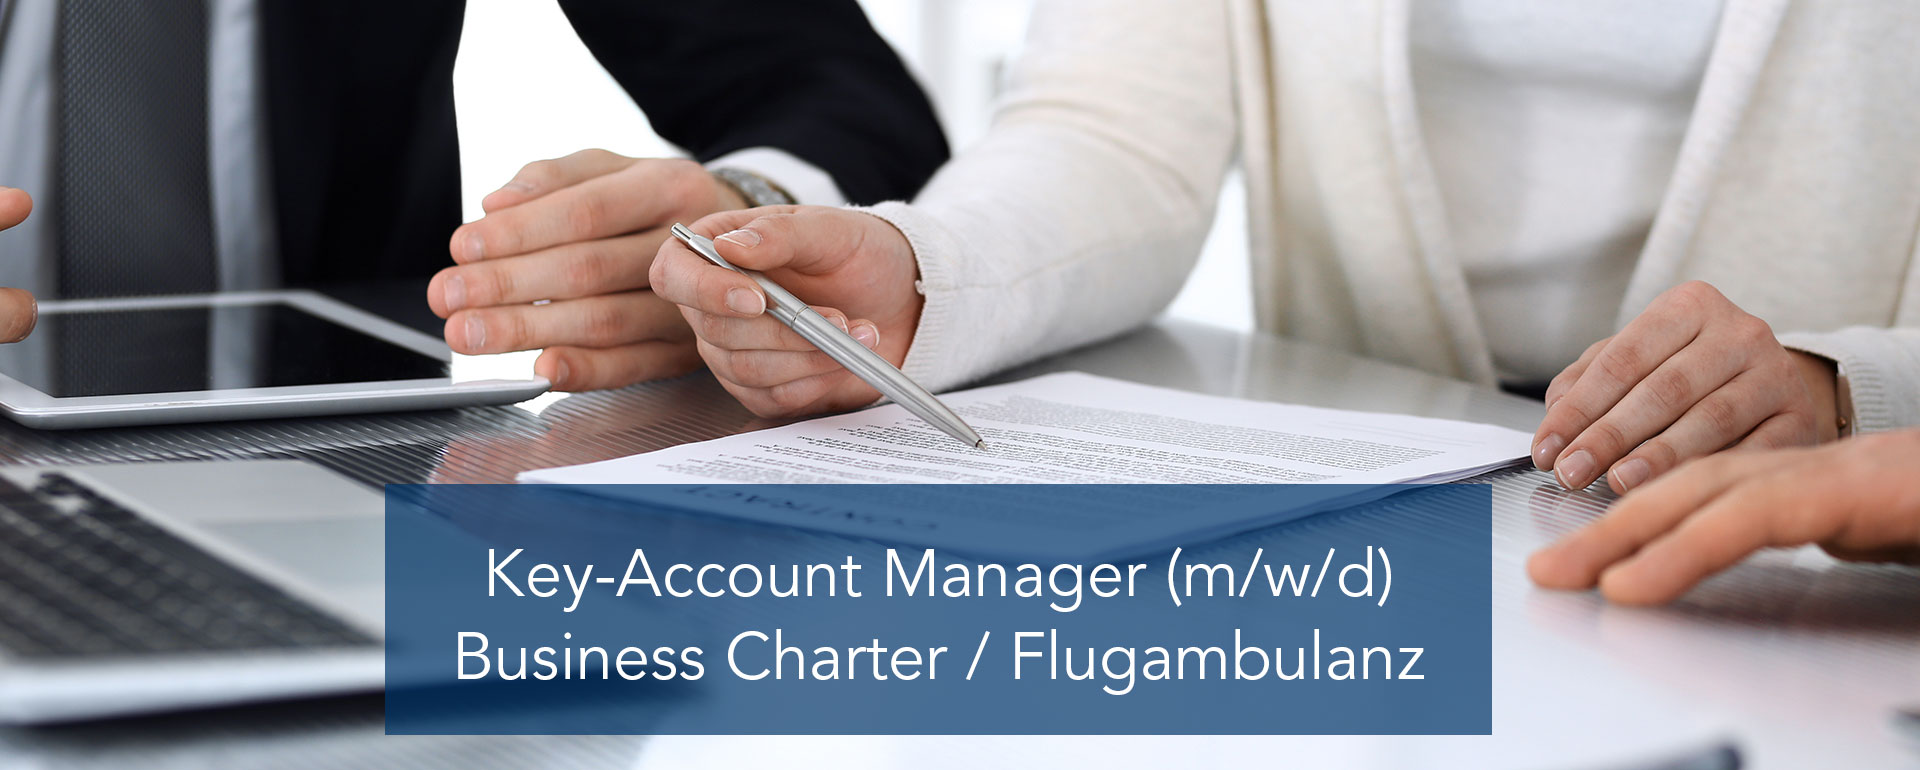 Key-Account Manager (m/w/d) Business Charter / Flugambulanz